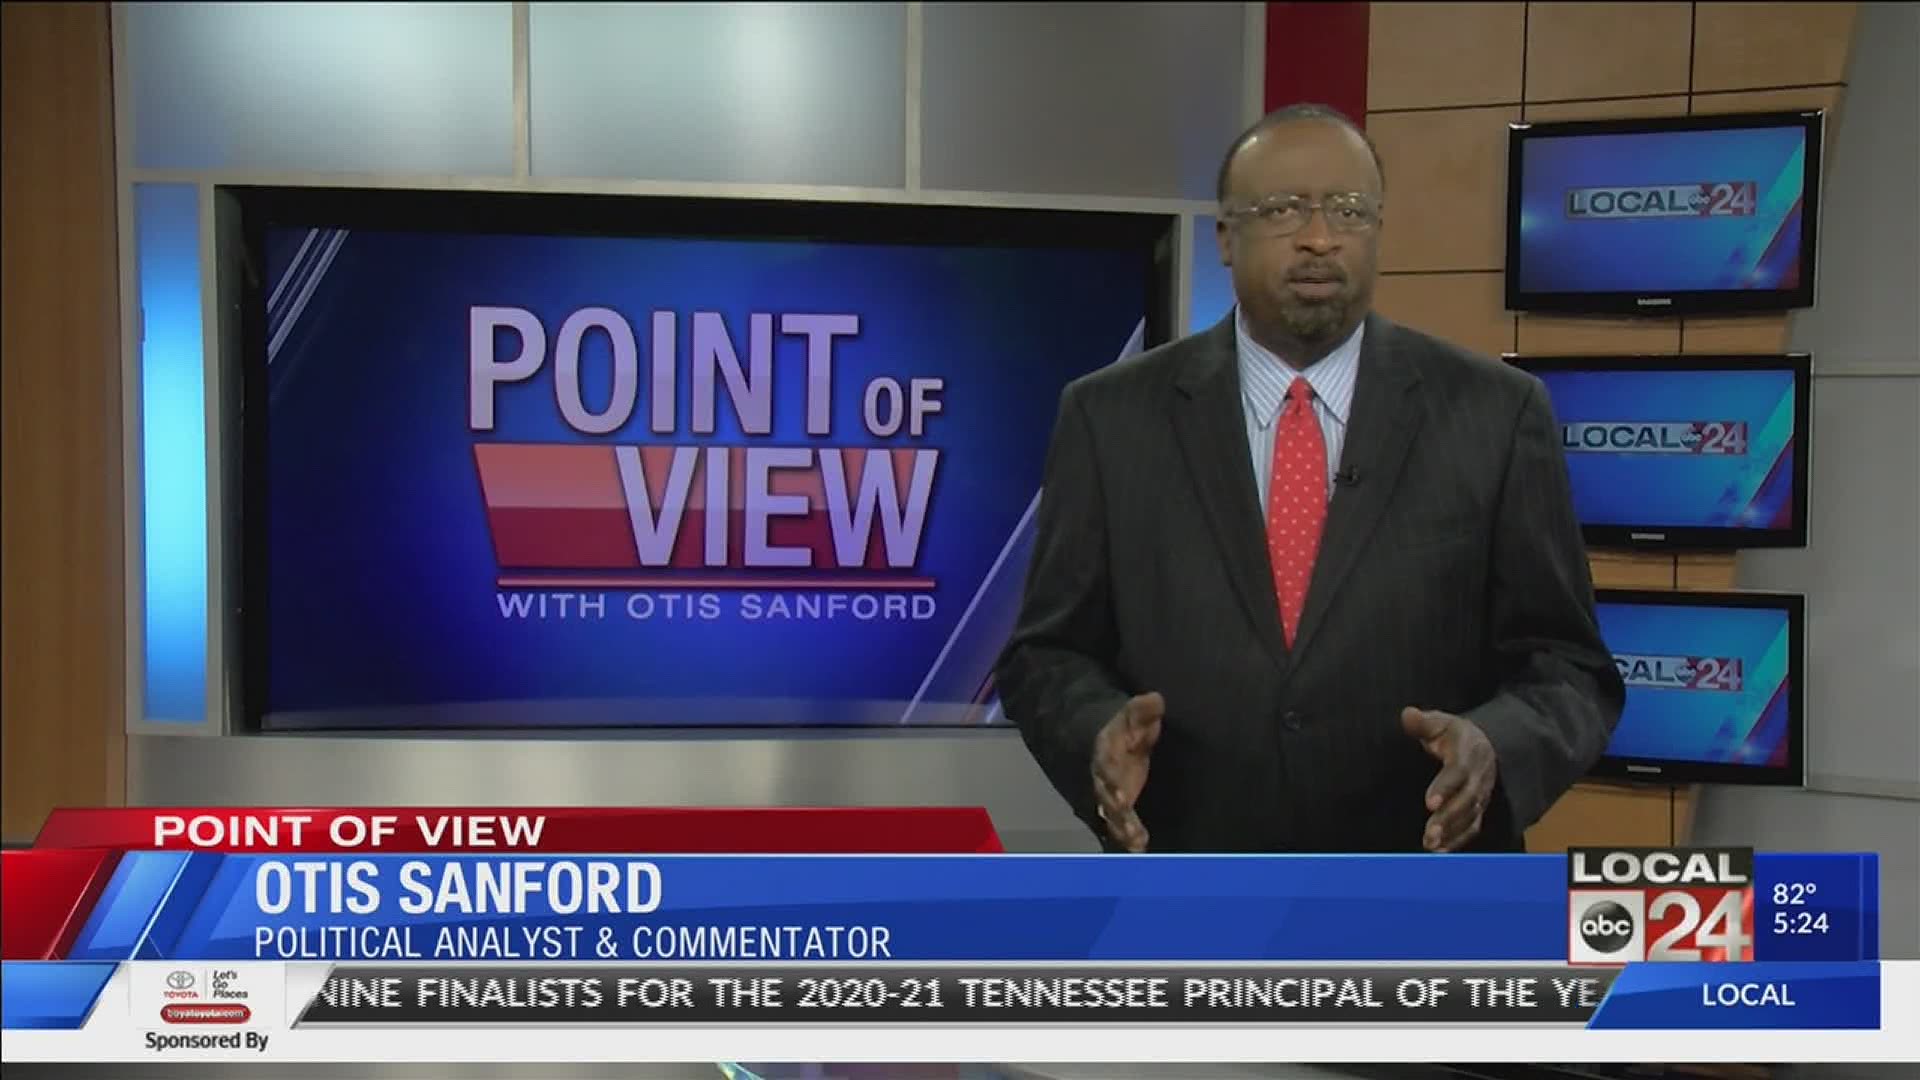 Local 24 News political analyst and commentator Otis Sanford shares his point of view on a campaign rally for U.S. Senate candidate Dr. Manny Sethi.